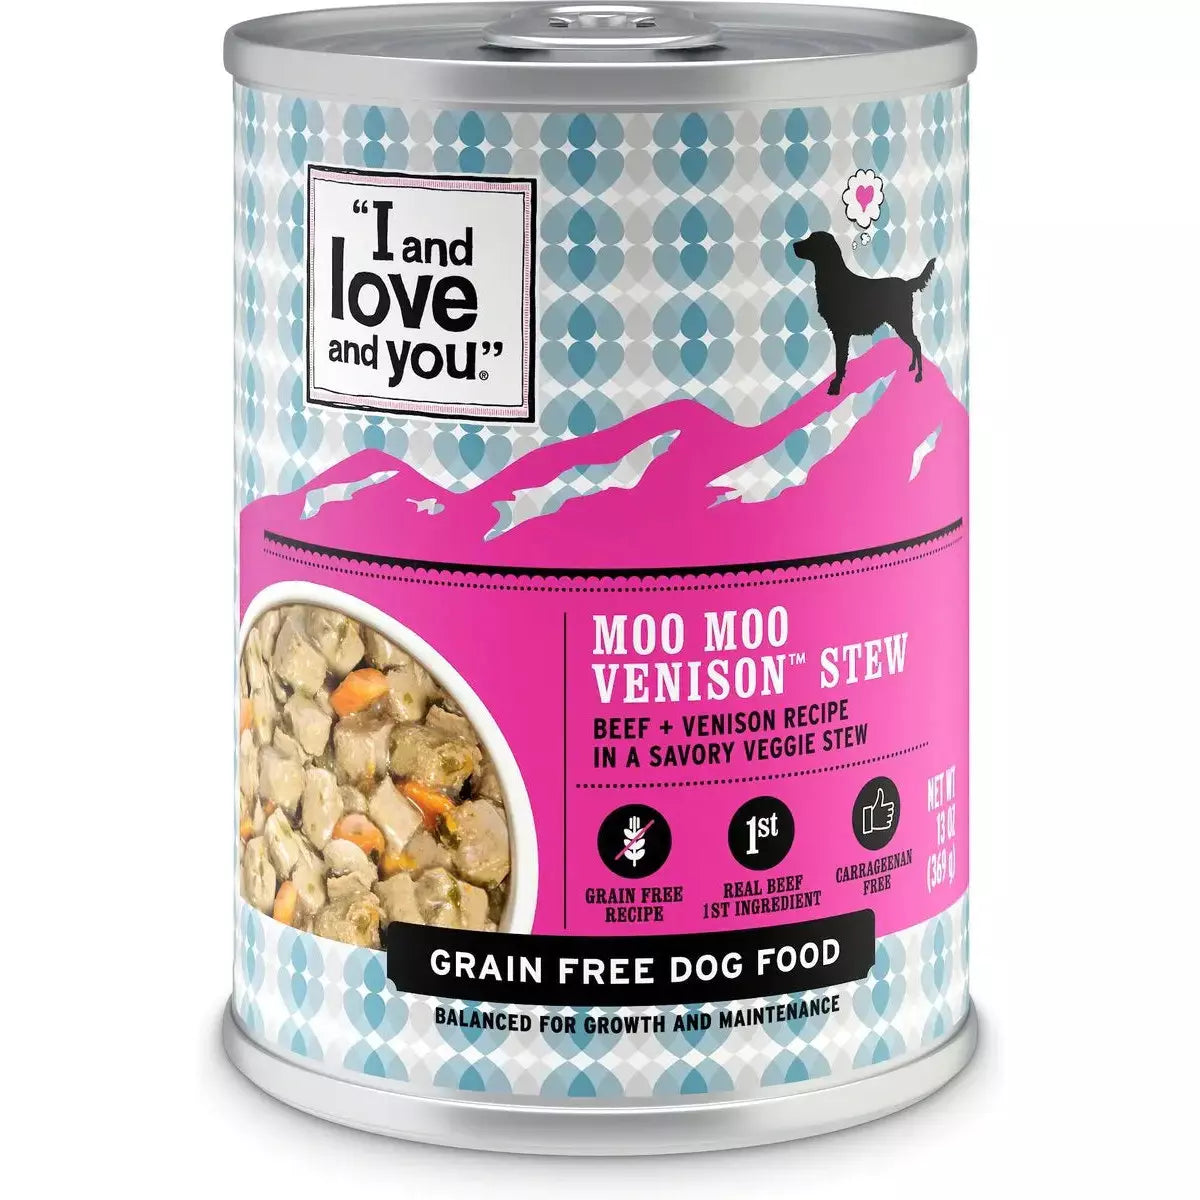 I and Love and You Moo Moo Venison Stew Grain-Free Canned Dog Food 13 OZ CAN (12 PACK) I and Love and You